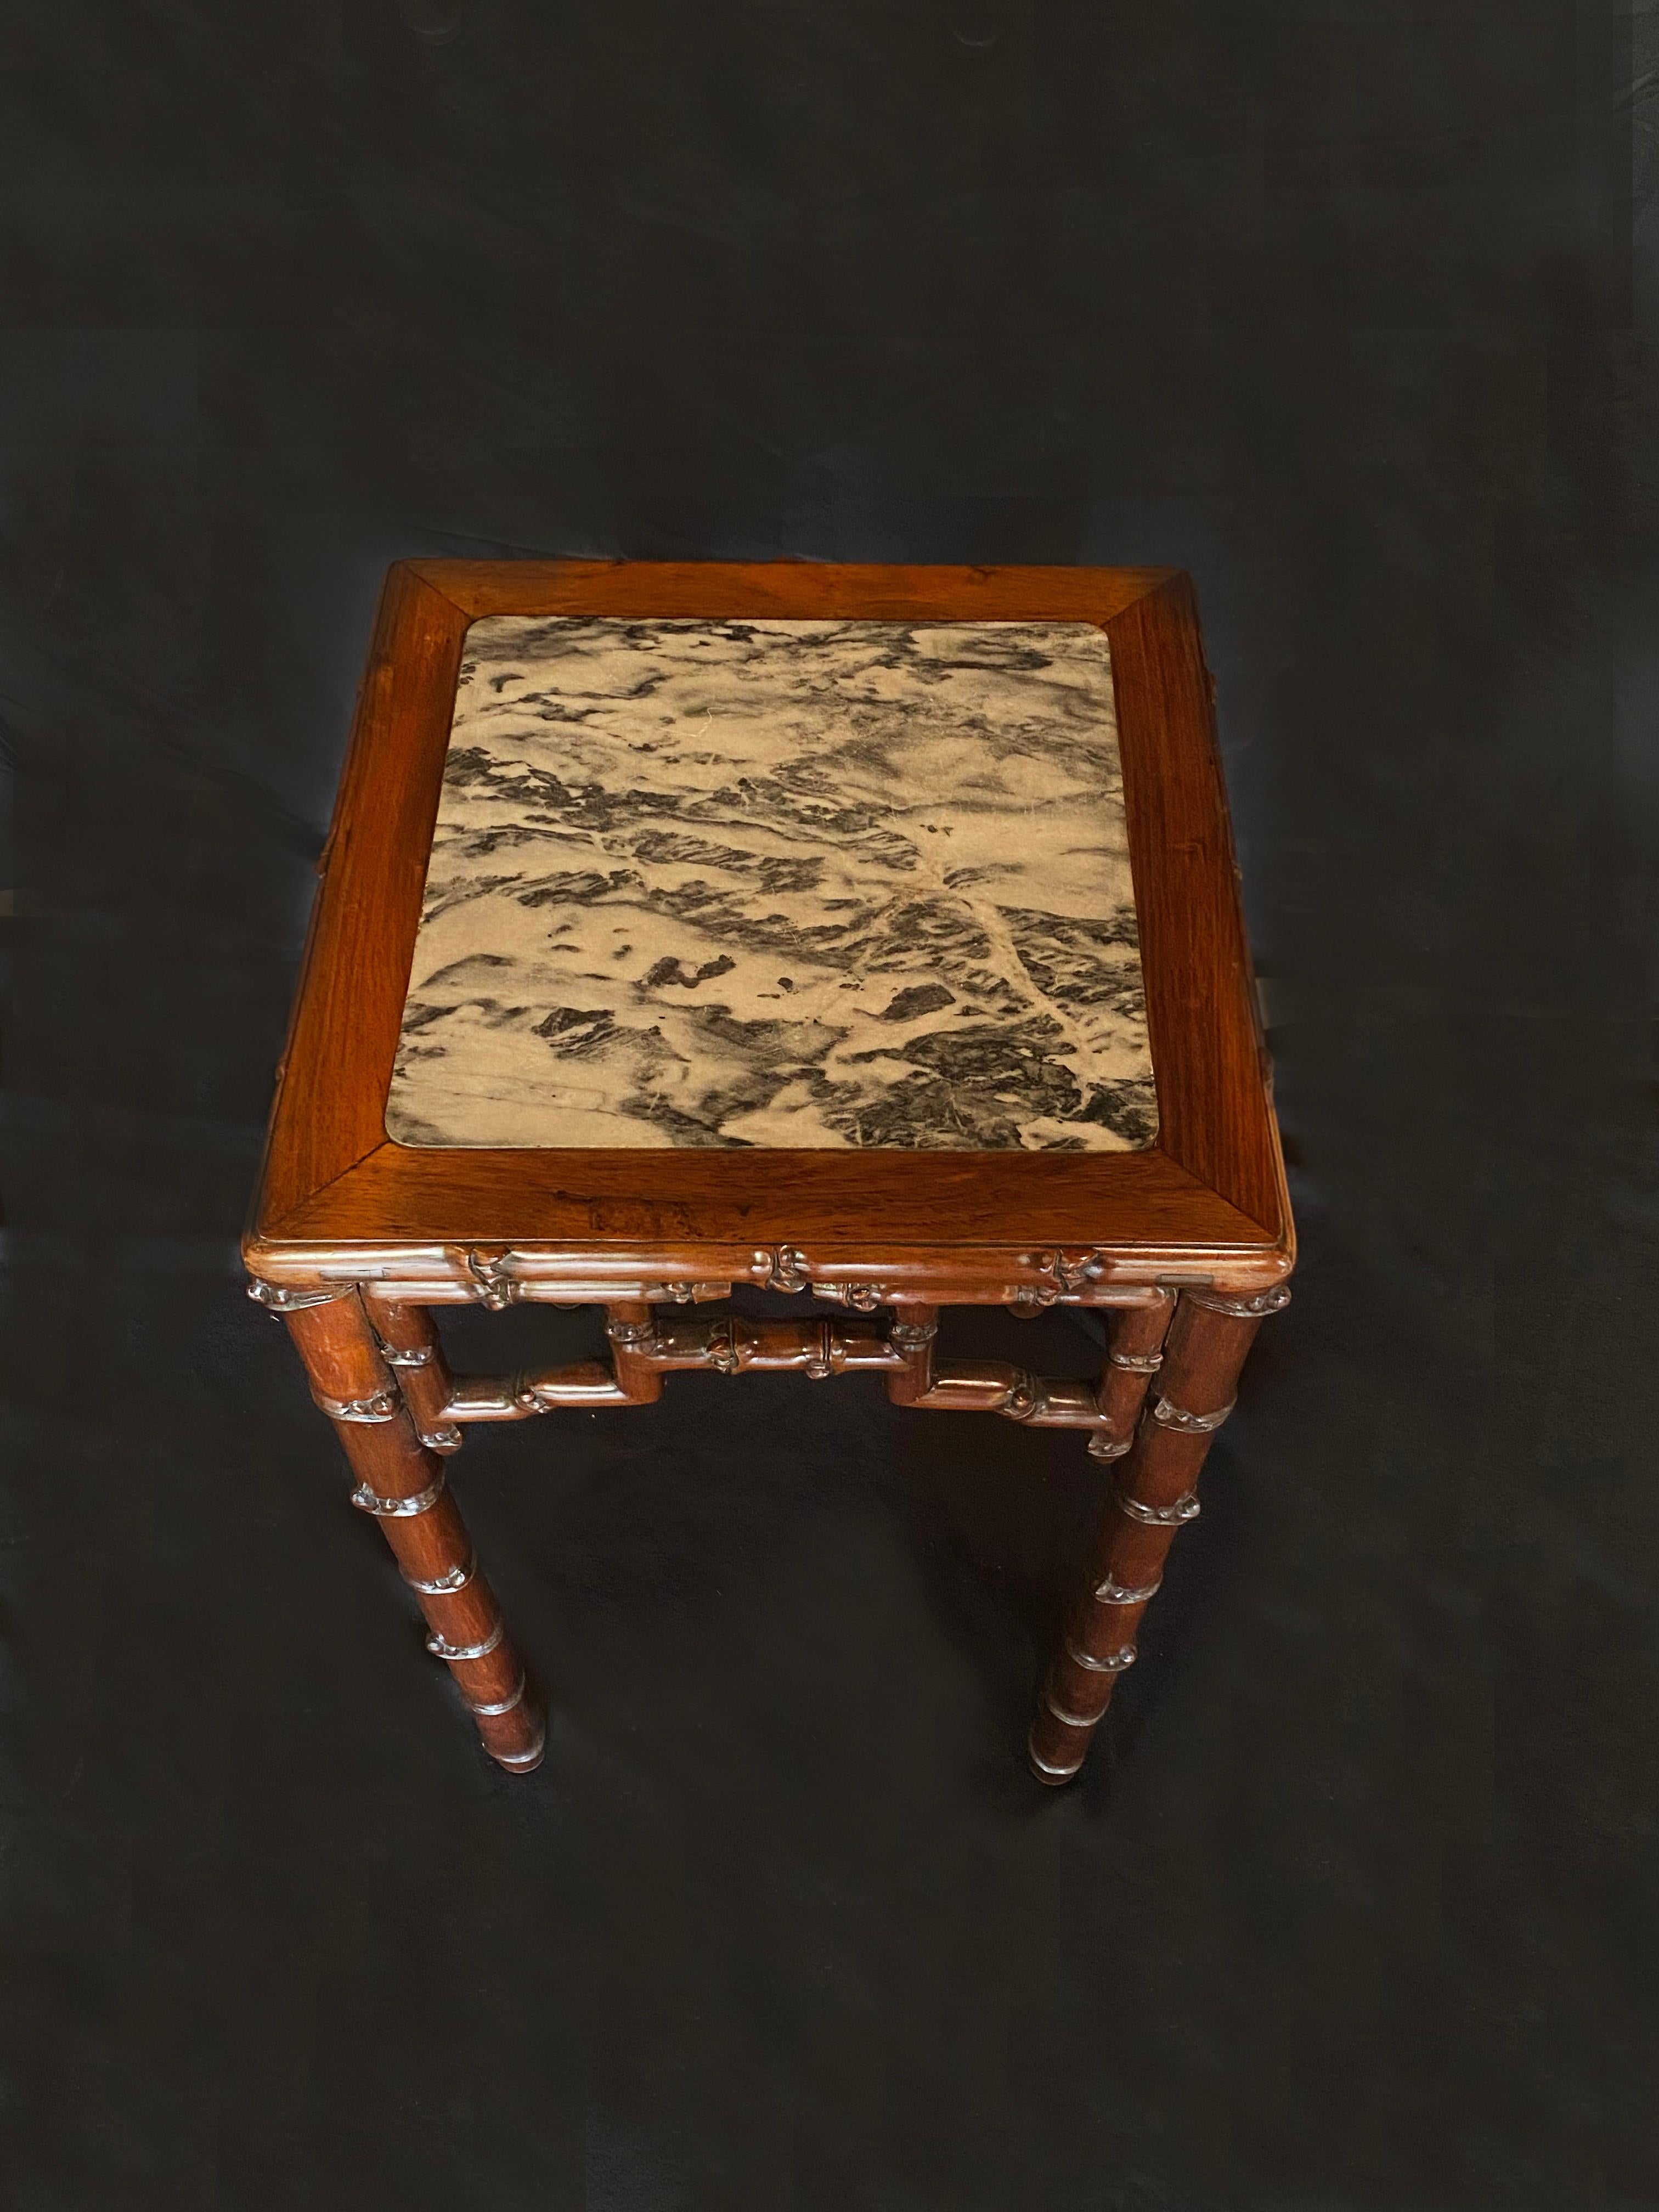 Chinese mahogany and marble side table. An elegantly simple shape with intricate Chinese design details. The wood has been carved to imitate bamboo and the table top features a beautiful black and white marble. A beautiful piece of furniture to add